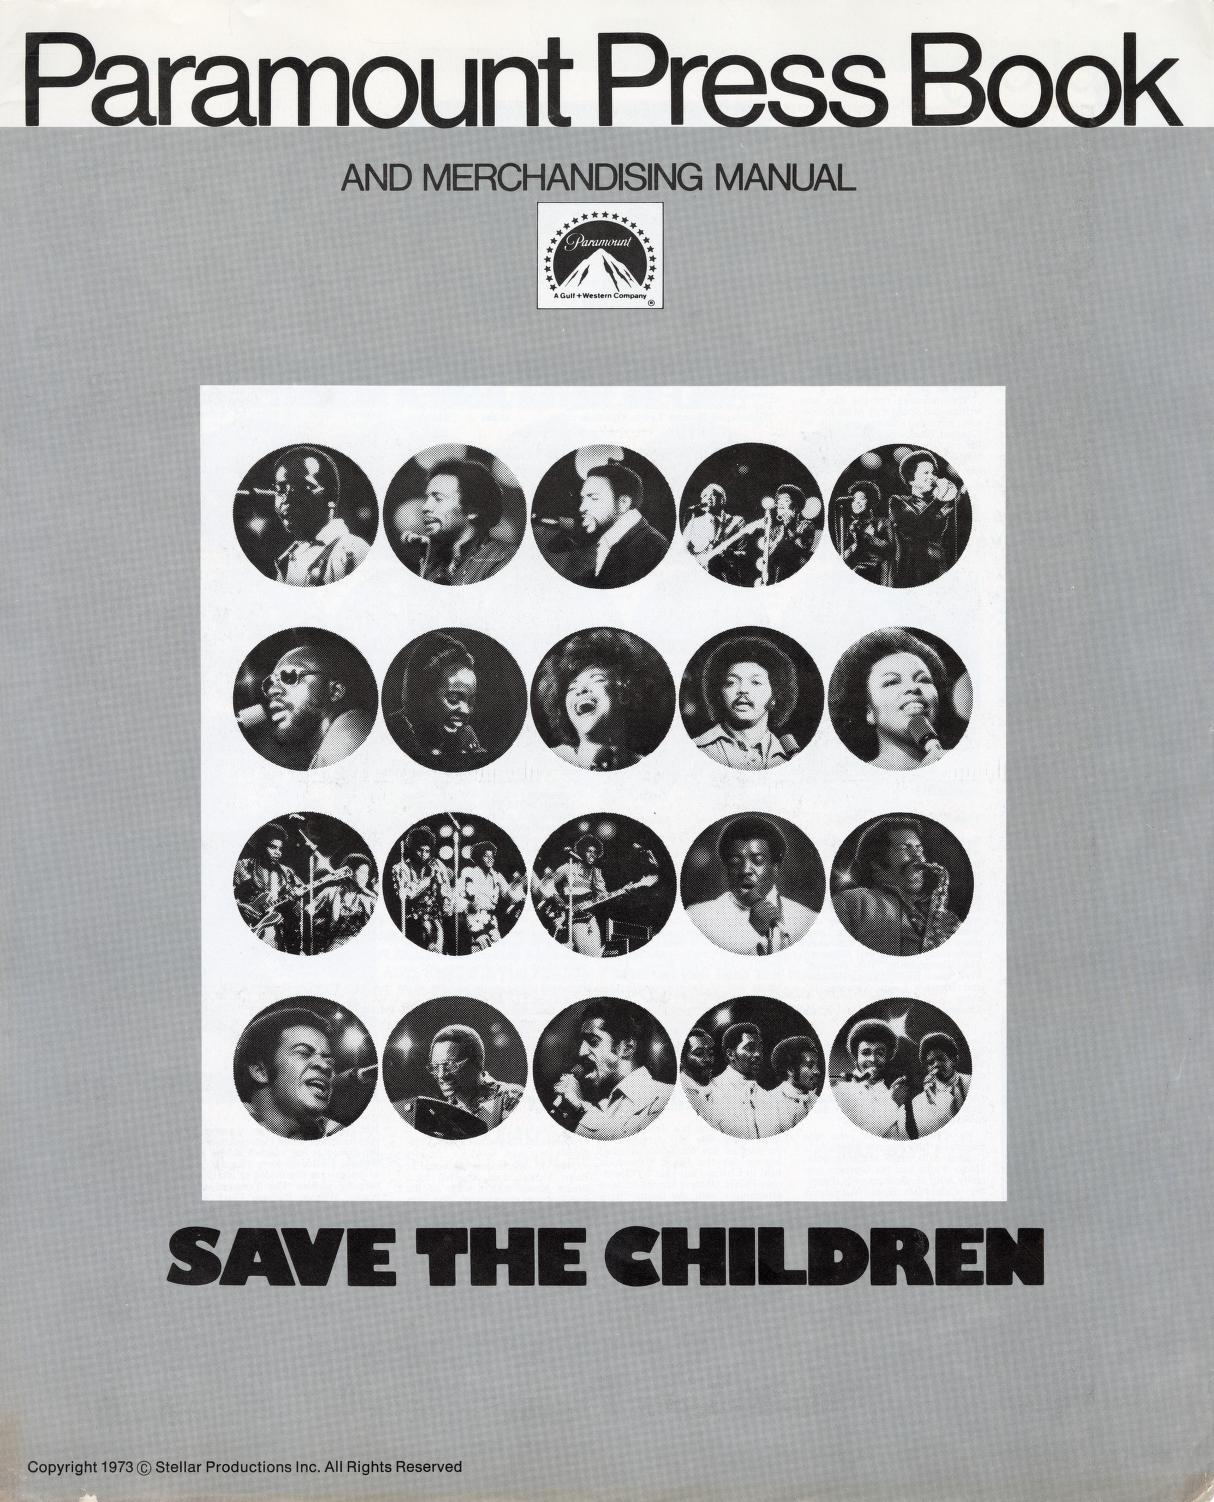 Save the Children (Paramount Pictures)